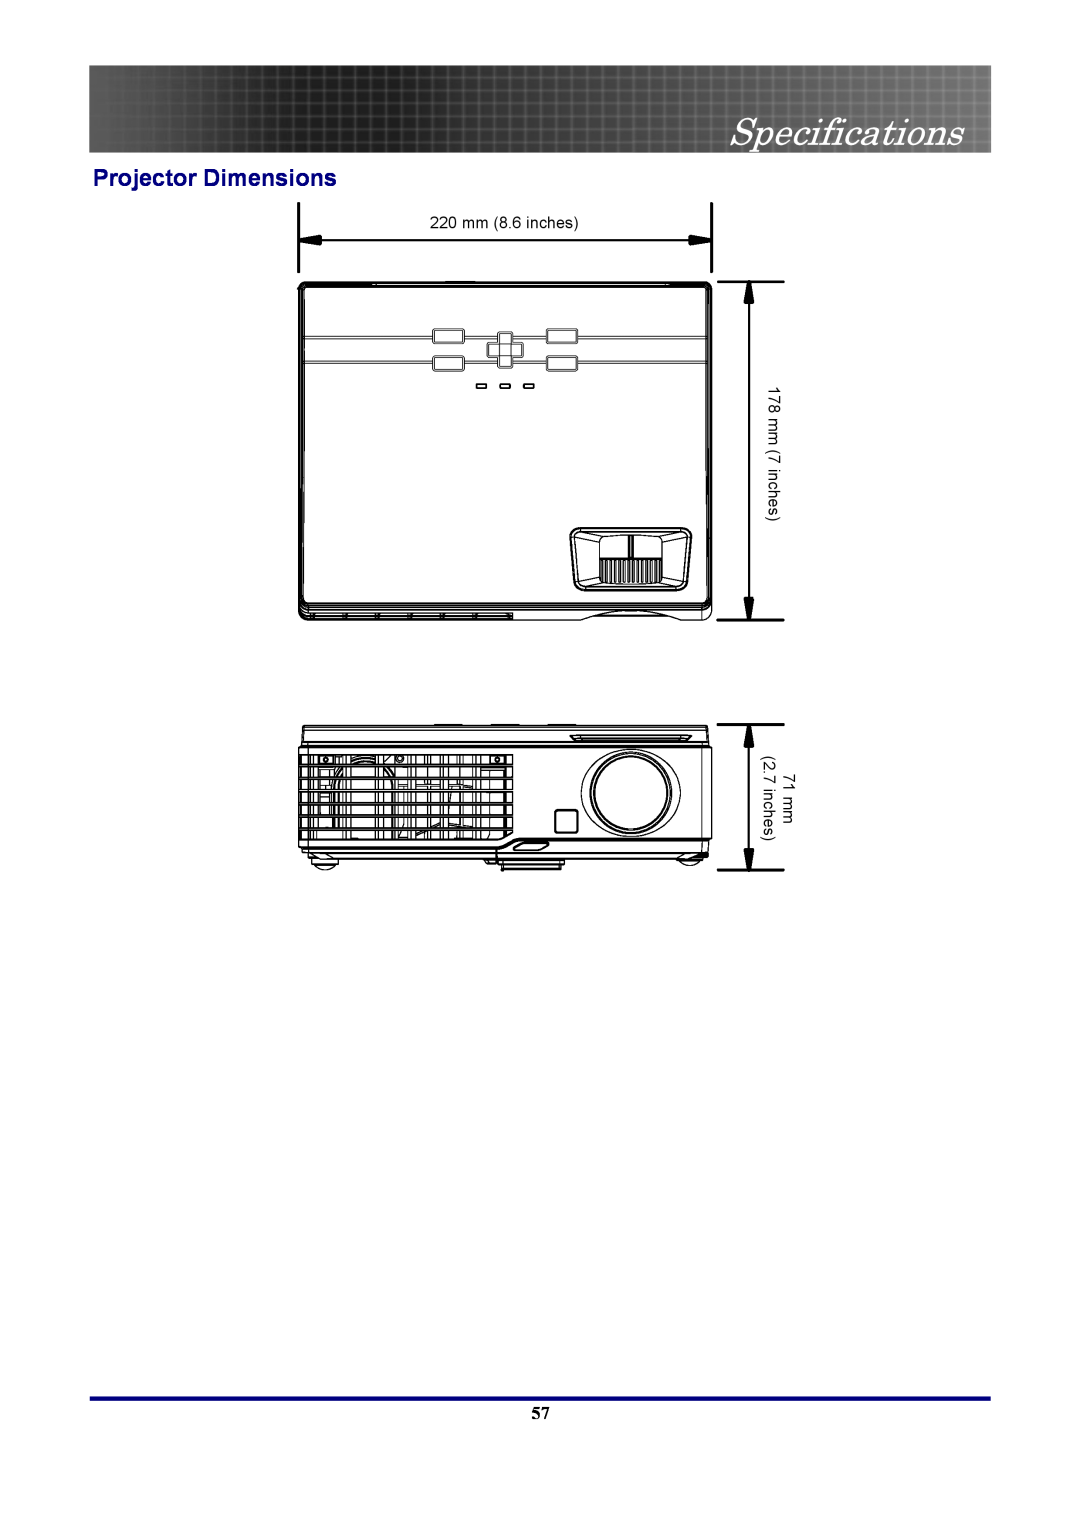 Optoma Technology EP7155 manual Projector Dimensions, Specifications, 220 mm8.6 inches, 71 mm 2.7 inches, 178 mm 7 inches 